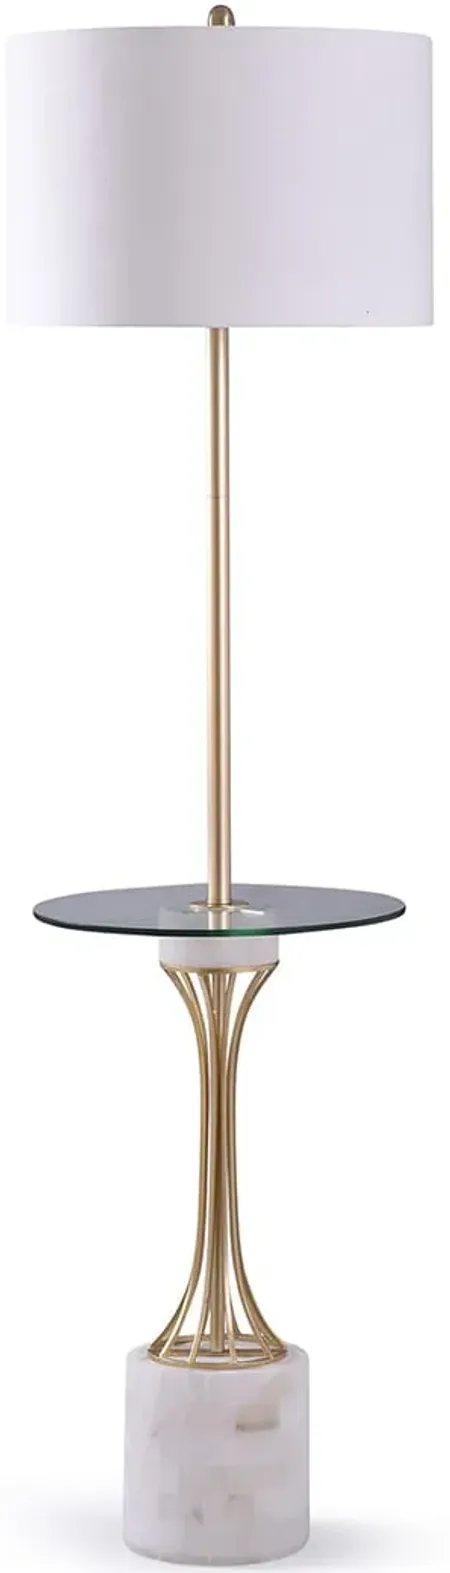 Gold Metal and Marble With Glass Tray Floor Lamp 52"H